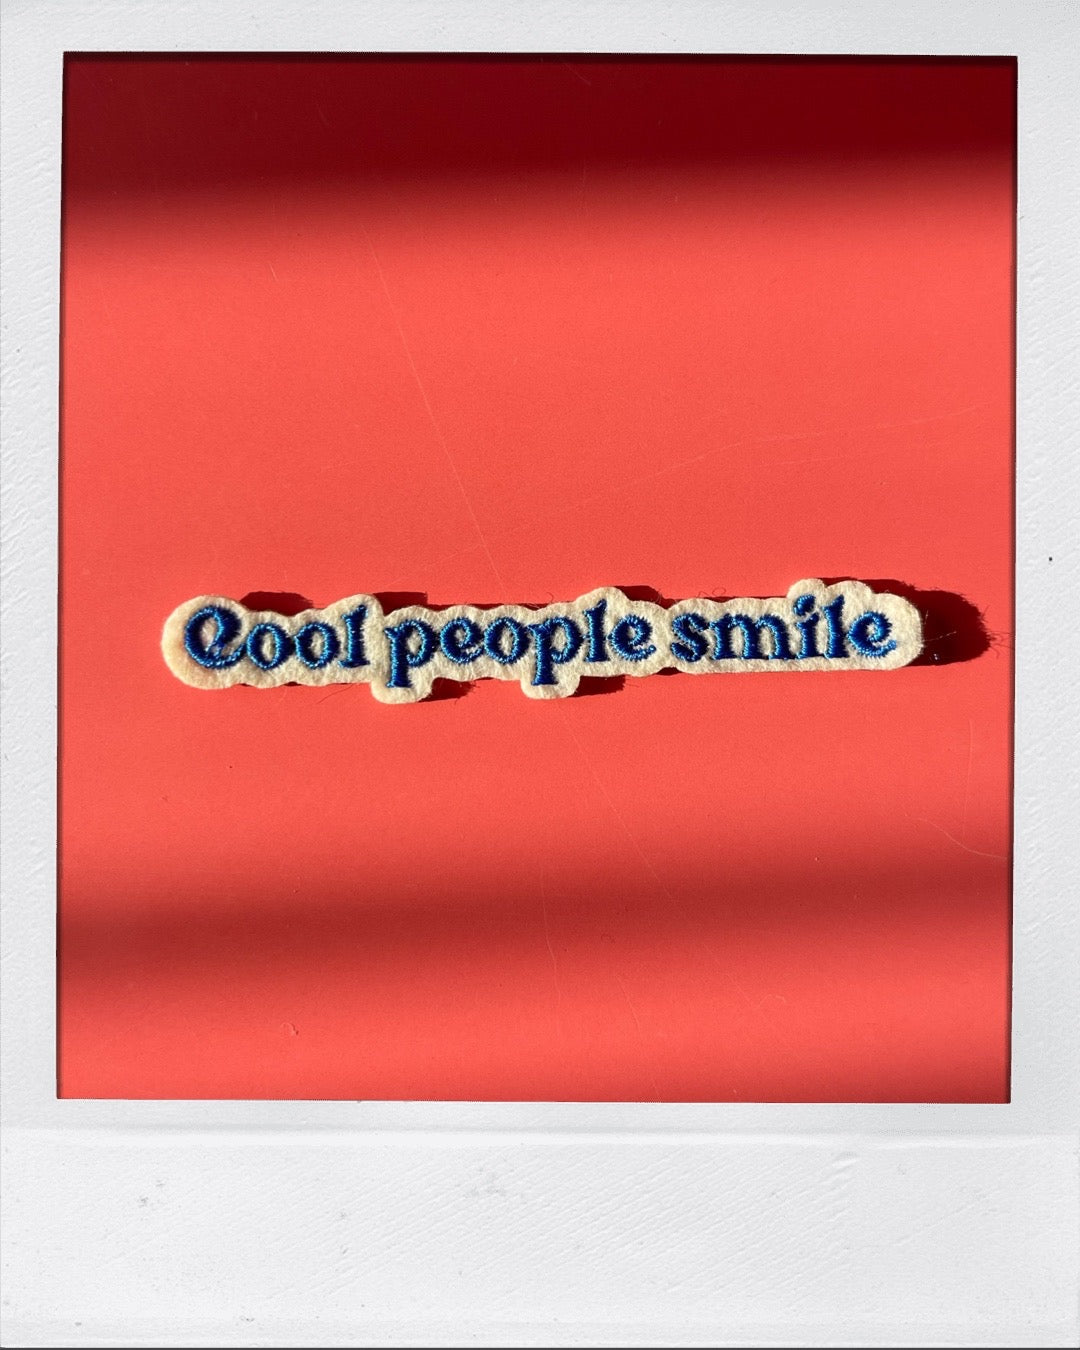 Cool people smile - tiny patch